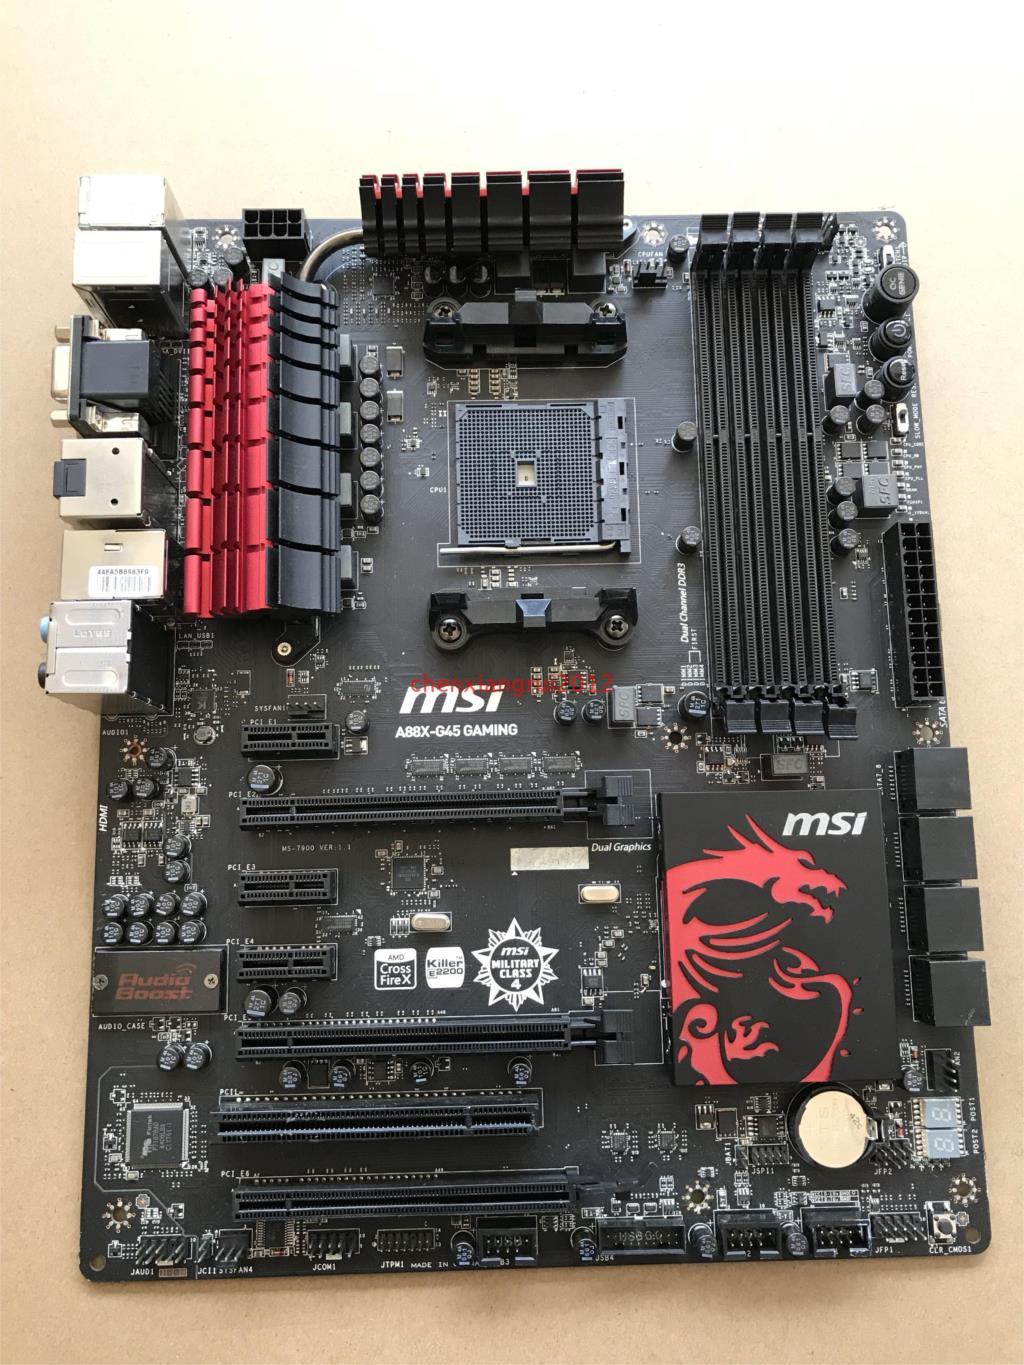 MSI A88X-G45 GAMING A88X FM2+ motherboard